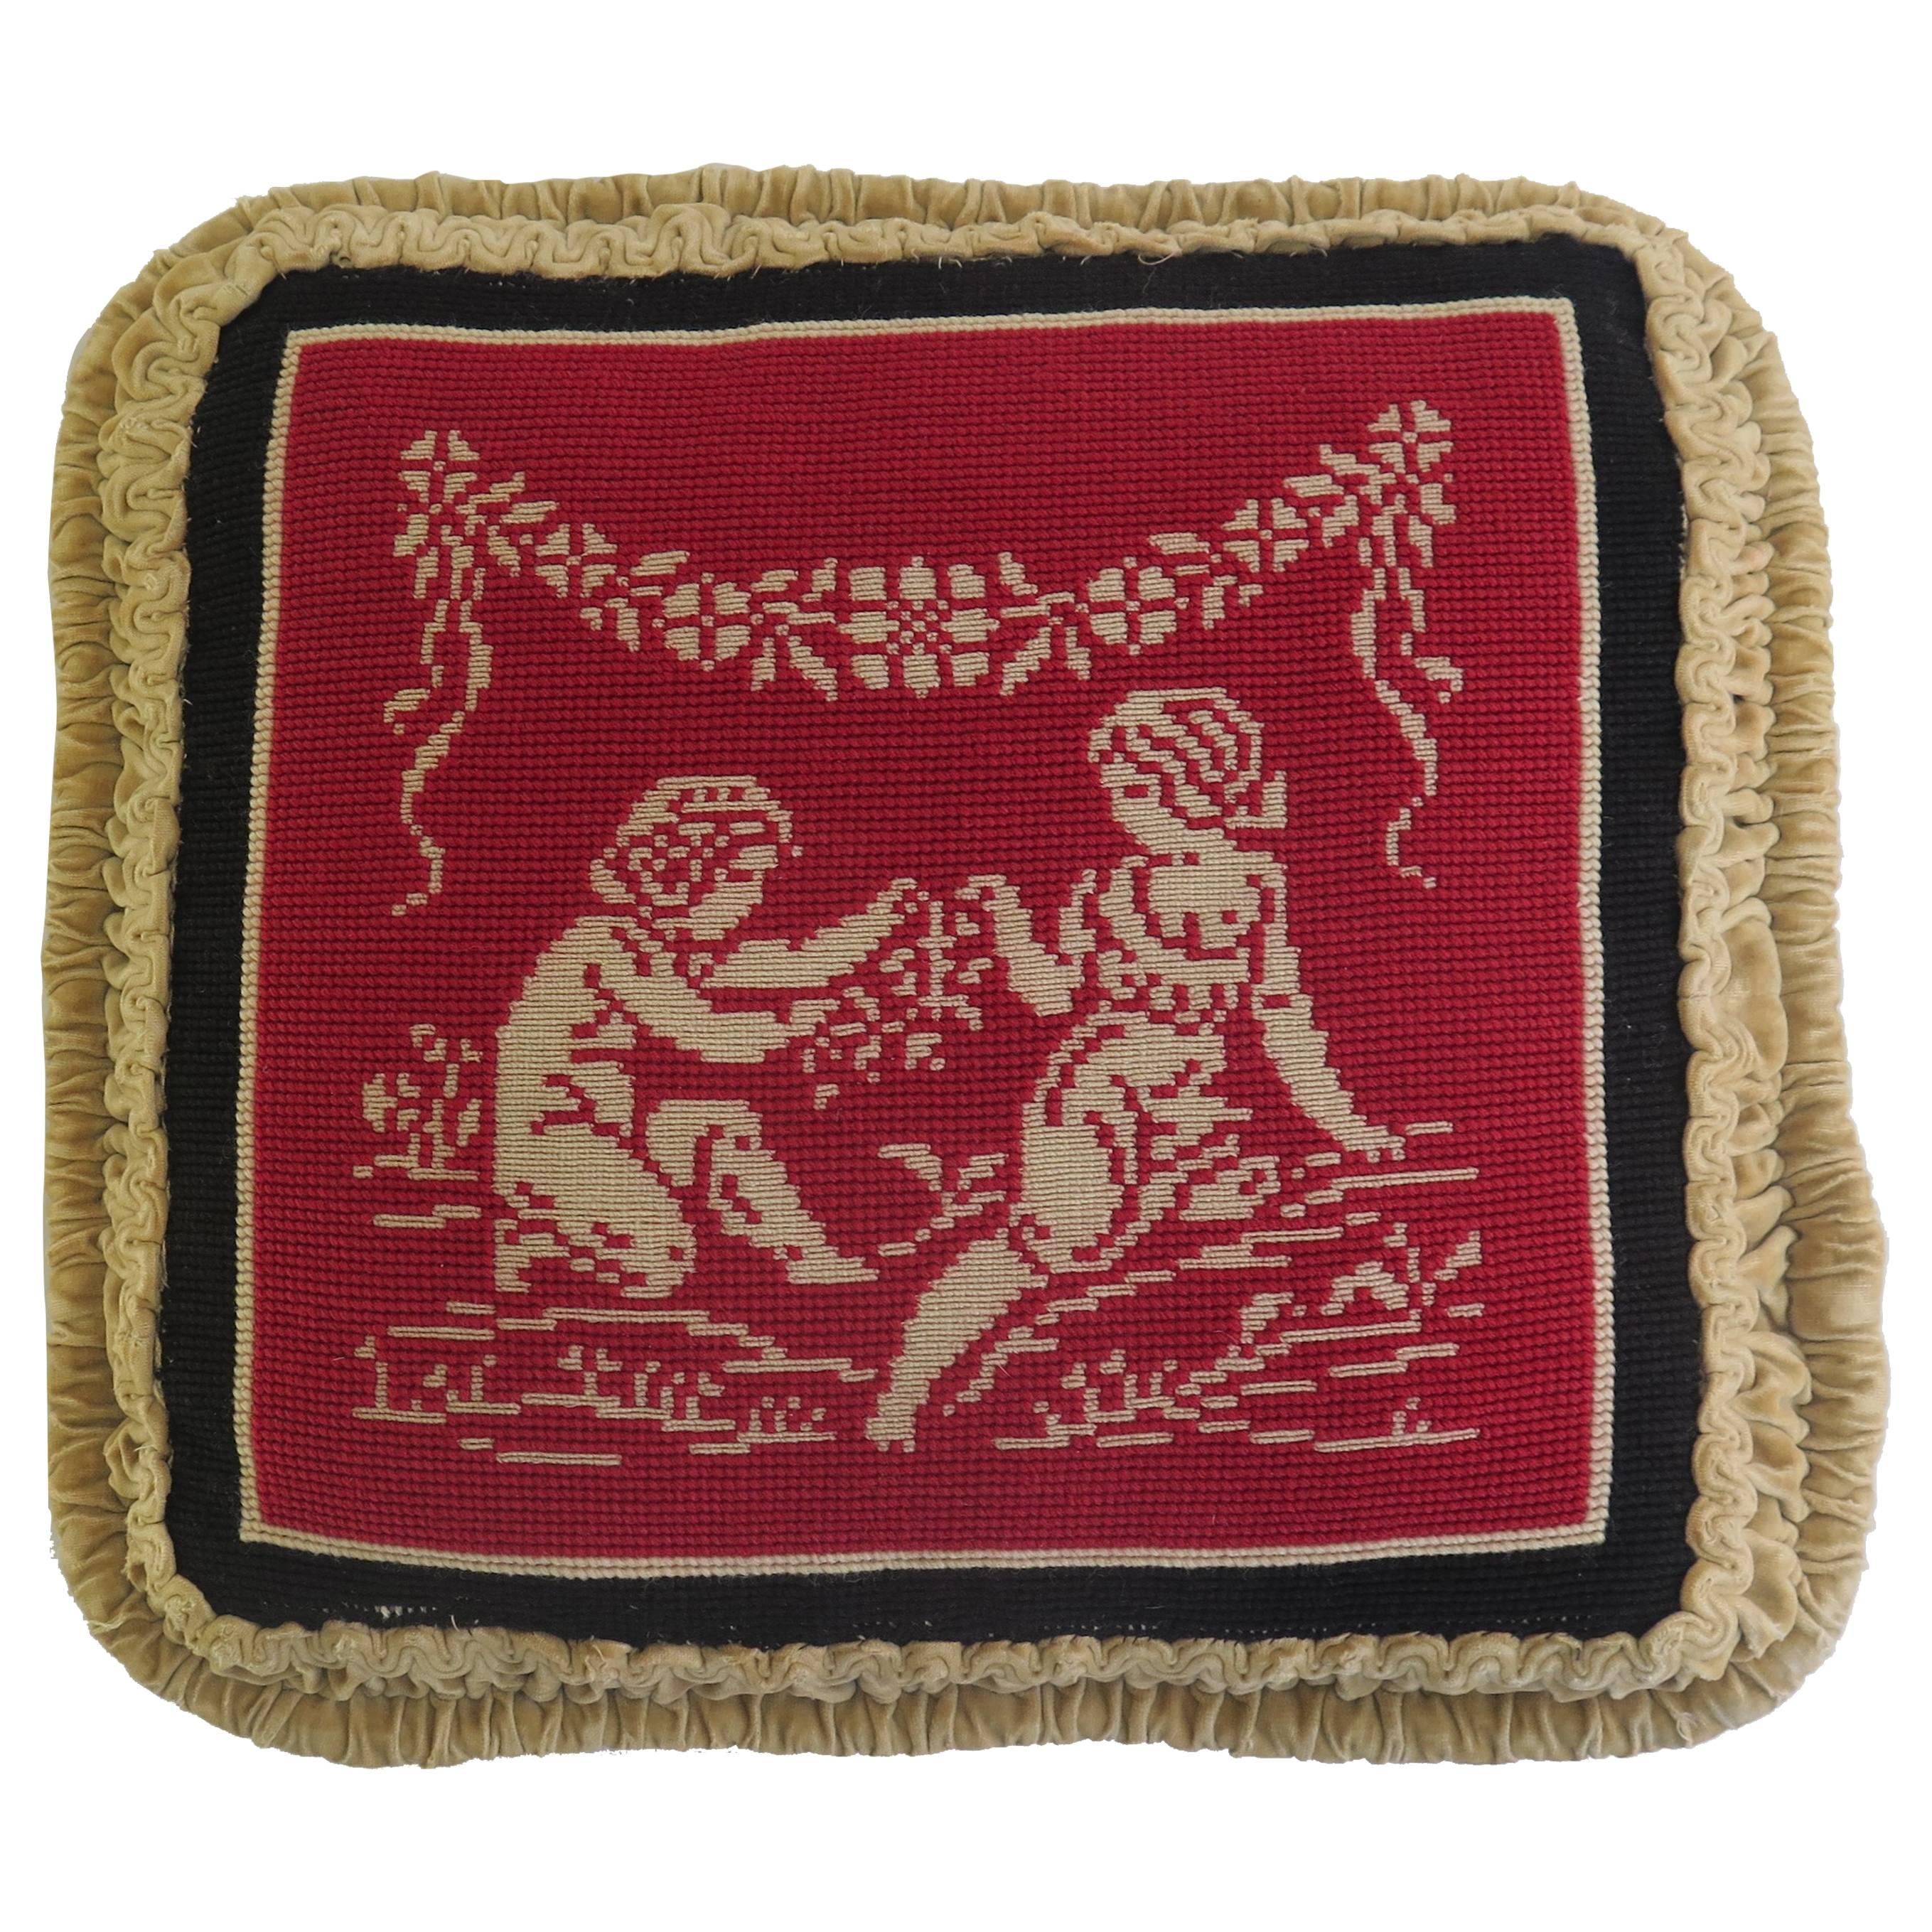 This is a very attractive and unusual needlepoint tapestry pillow or cushion with a classical design, which we date to the late 19th century. 

The classical themed design depicts two figures ( male and female - cupid’s lovers?) in a light cream,